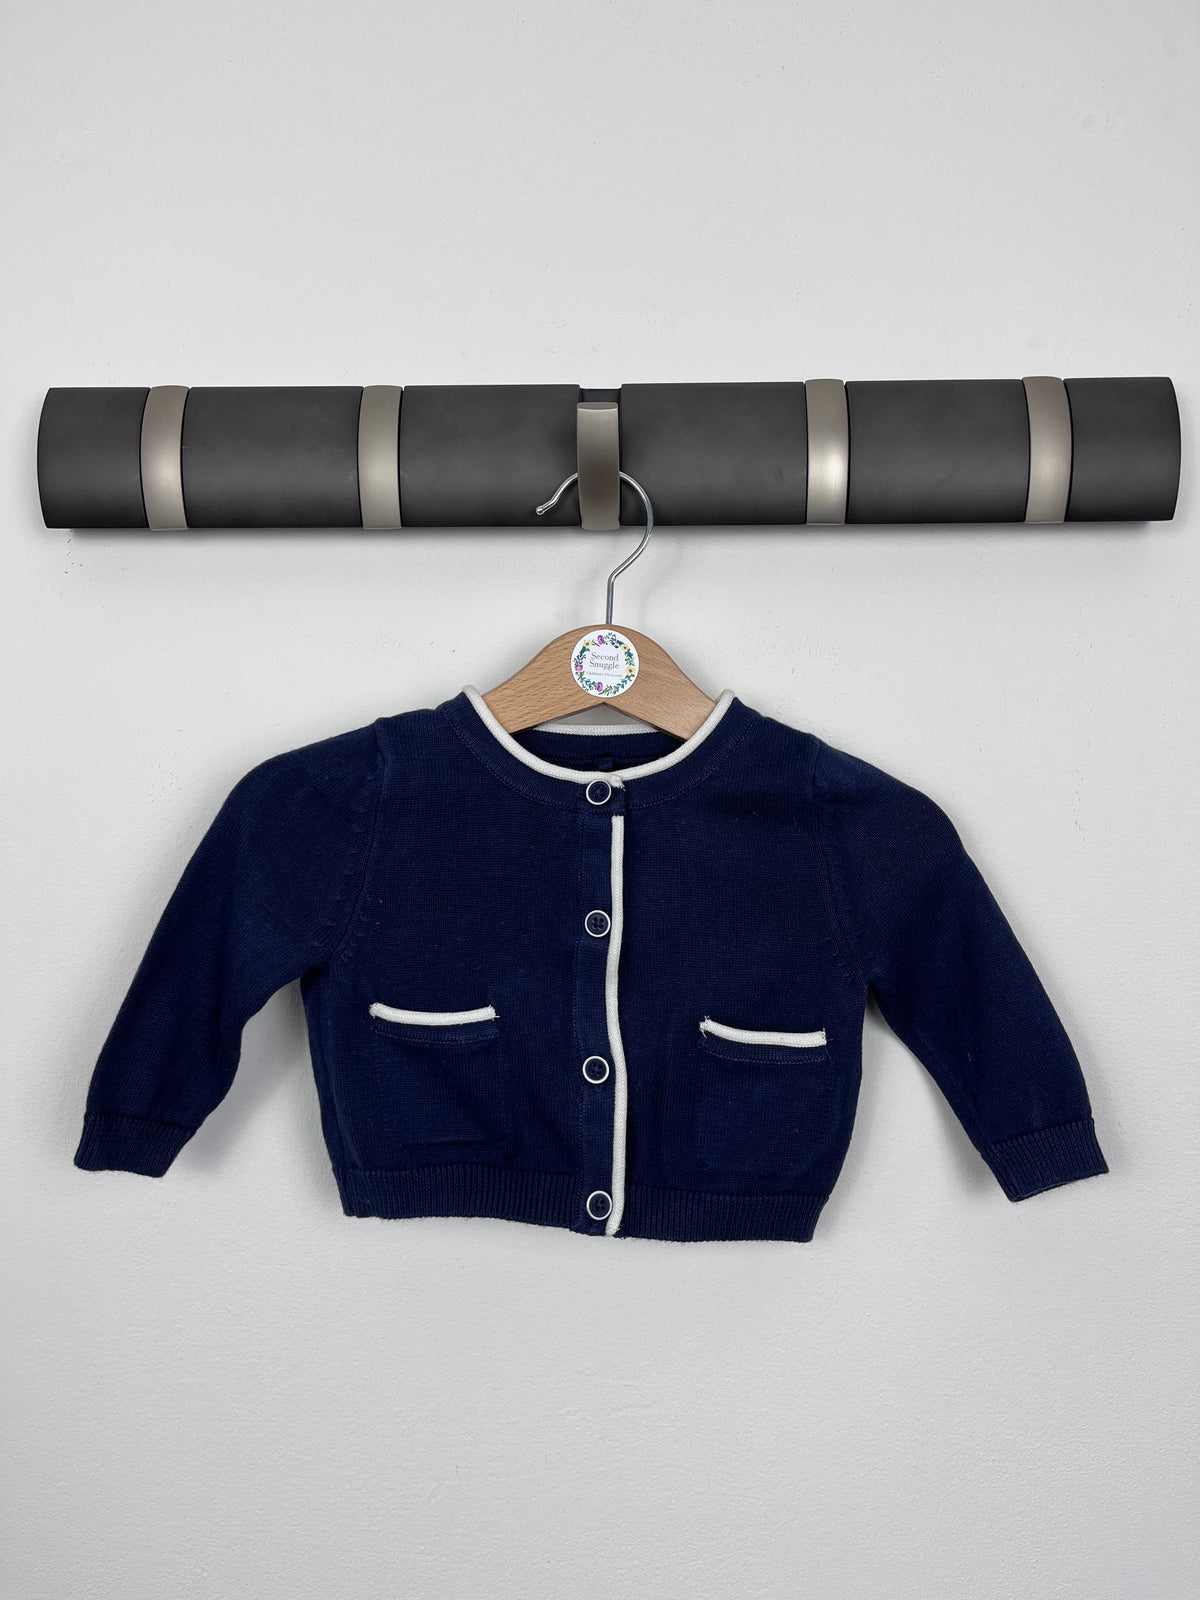 M&S 3-6 Months-Cardigans-Second Snuggle Preloved